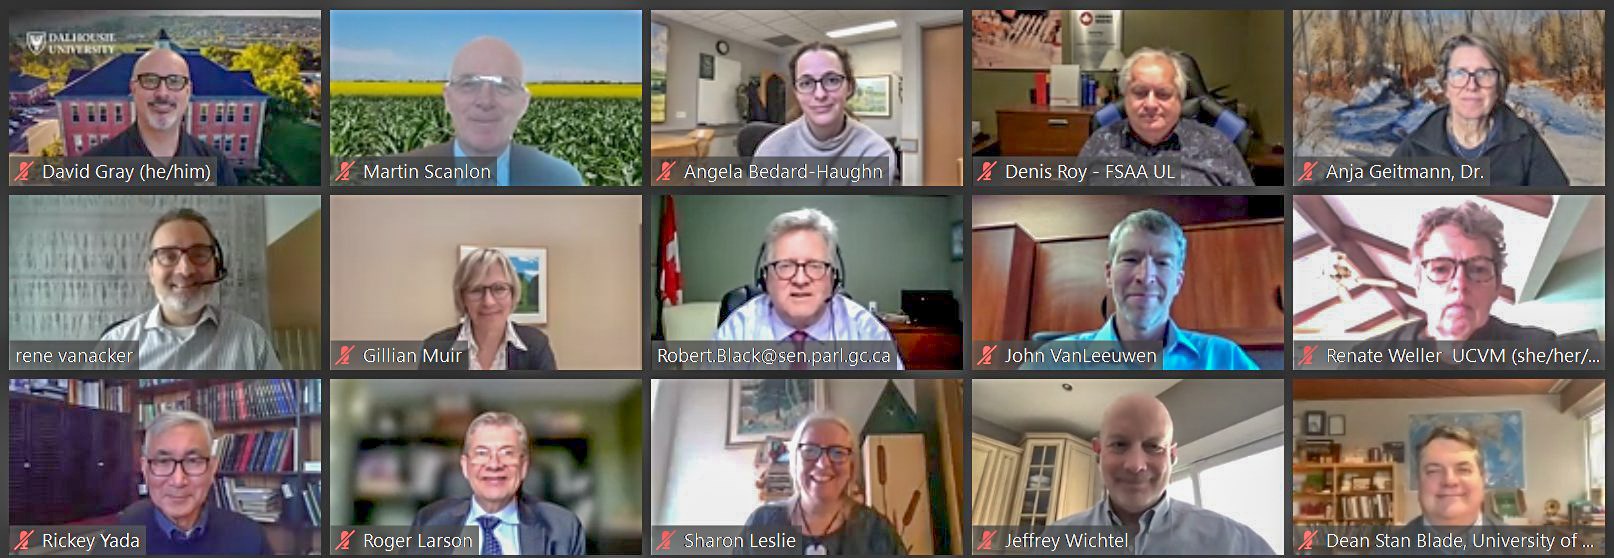 Monday, February 7, 2022 – Senator Rob Black meets virtually with the Deans Council of Agriculture, Food and Veterinary Medicine. During the virtual meeting, Senator Black heard from those who are helping to support Canadian agriculture at post-secondary schools across the country.